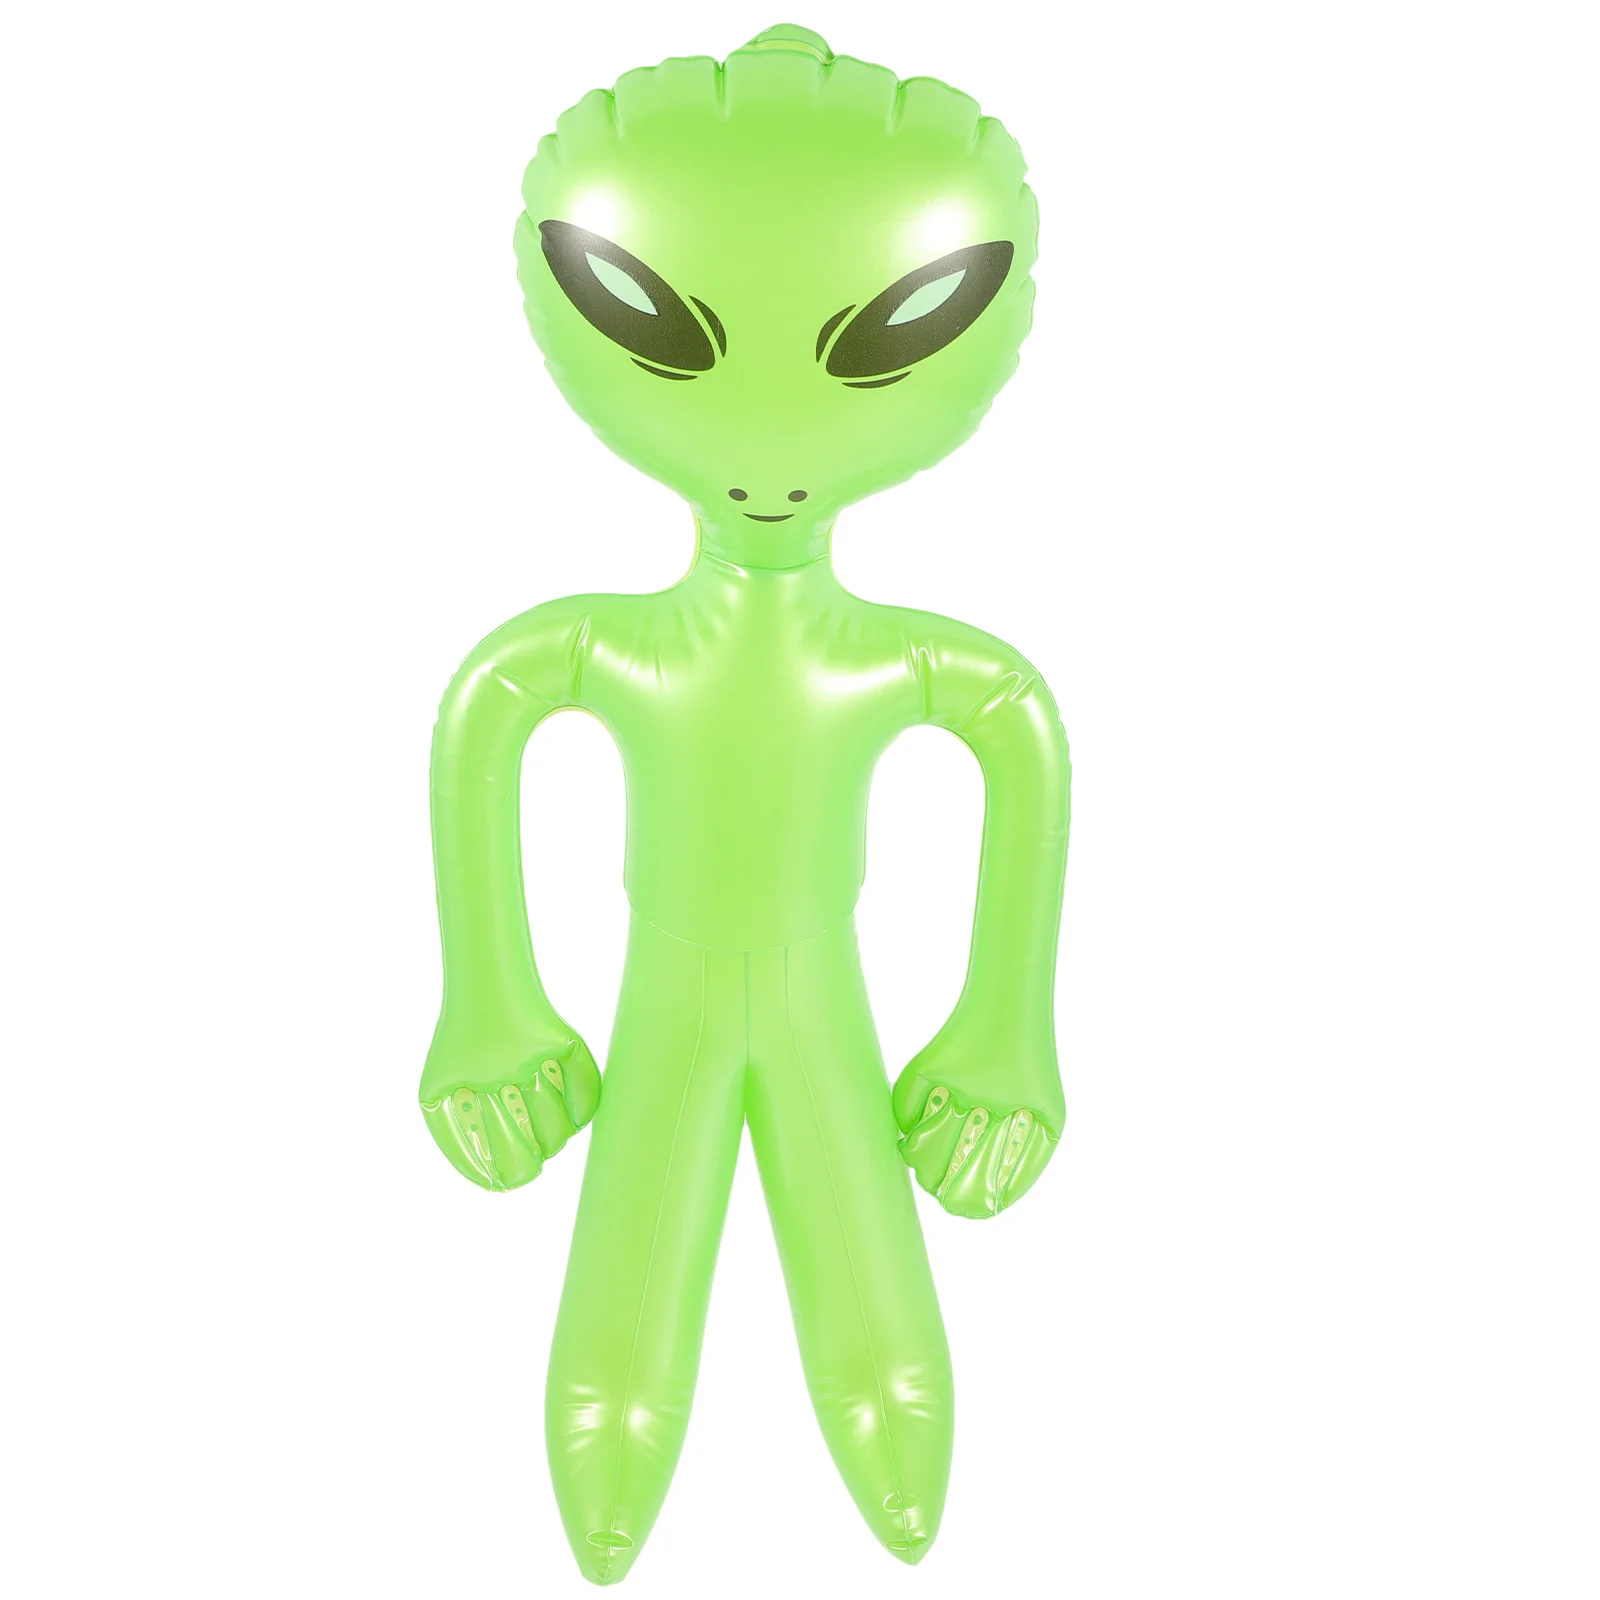 

Giant Inflatable Alien Novelty Blowing up Alien Doll Prop Theme Christmas Birthday Party Novelty Treasures Outer Space Party